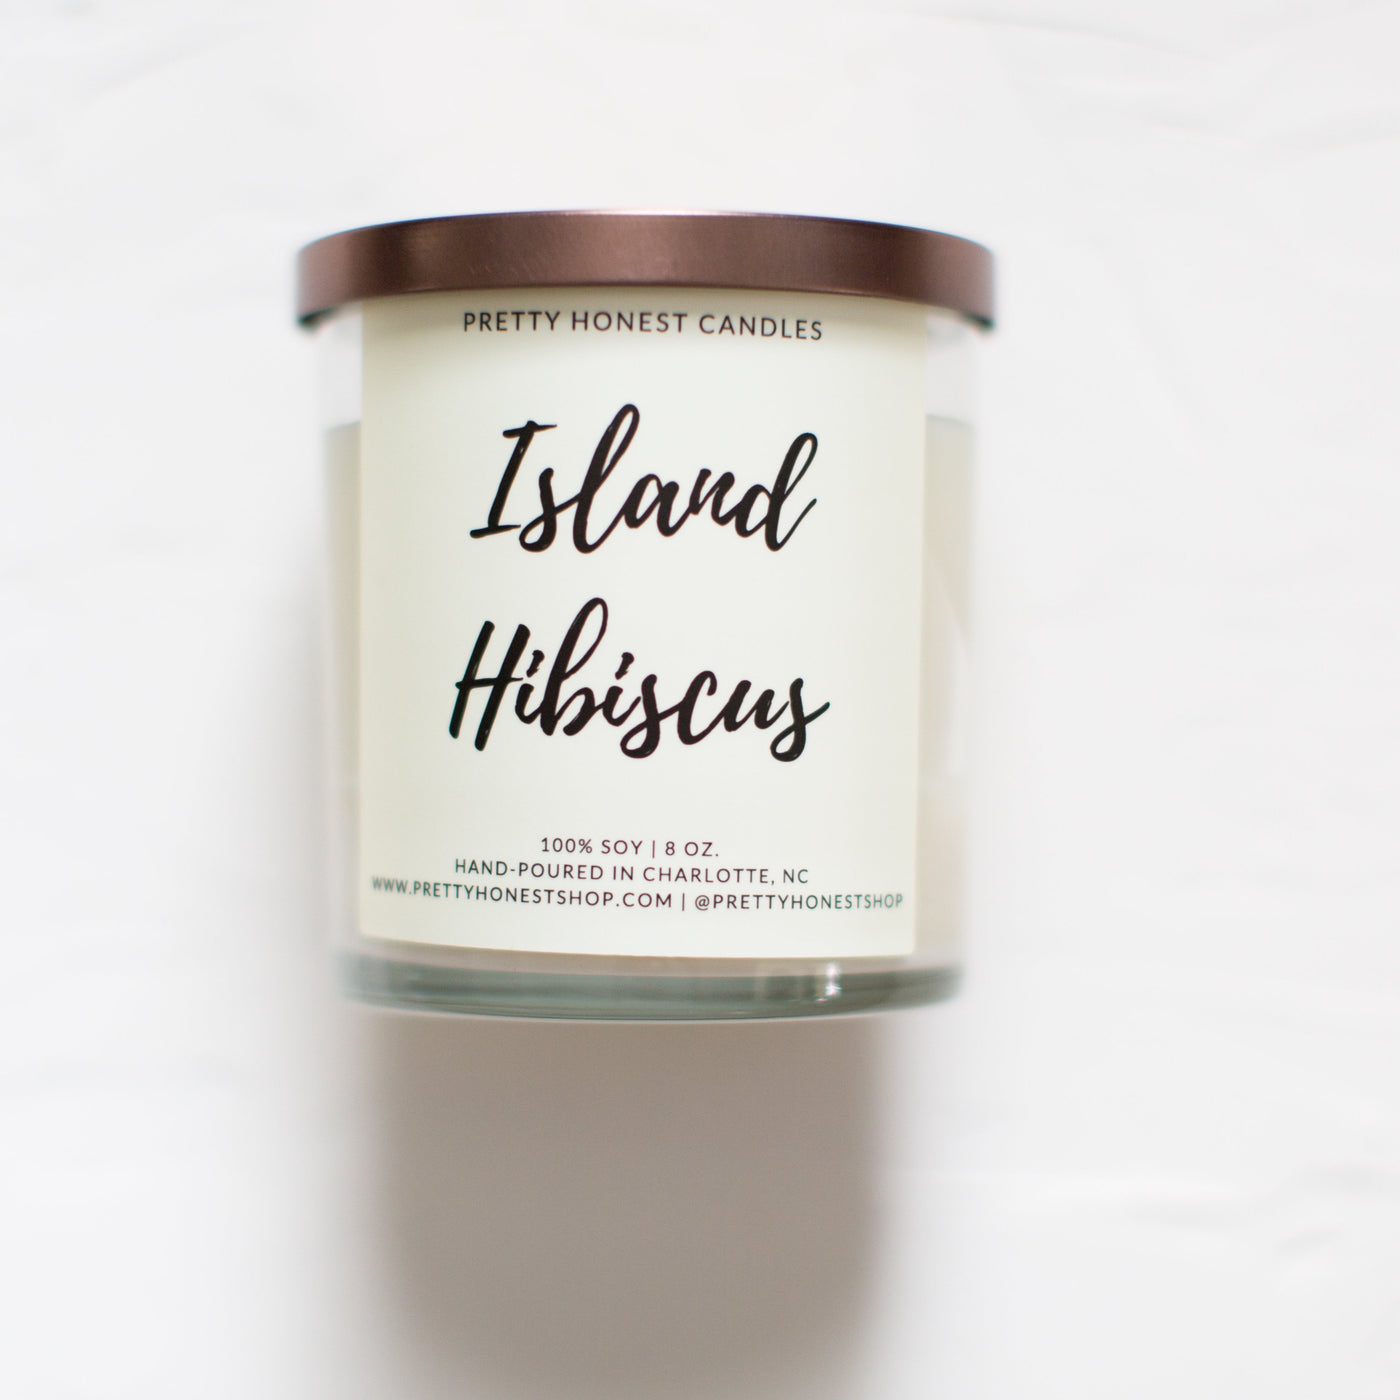 Island Hibiscus Soy Candle - Pretty Honest Candles